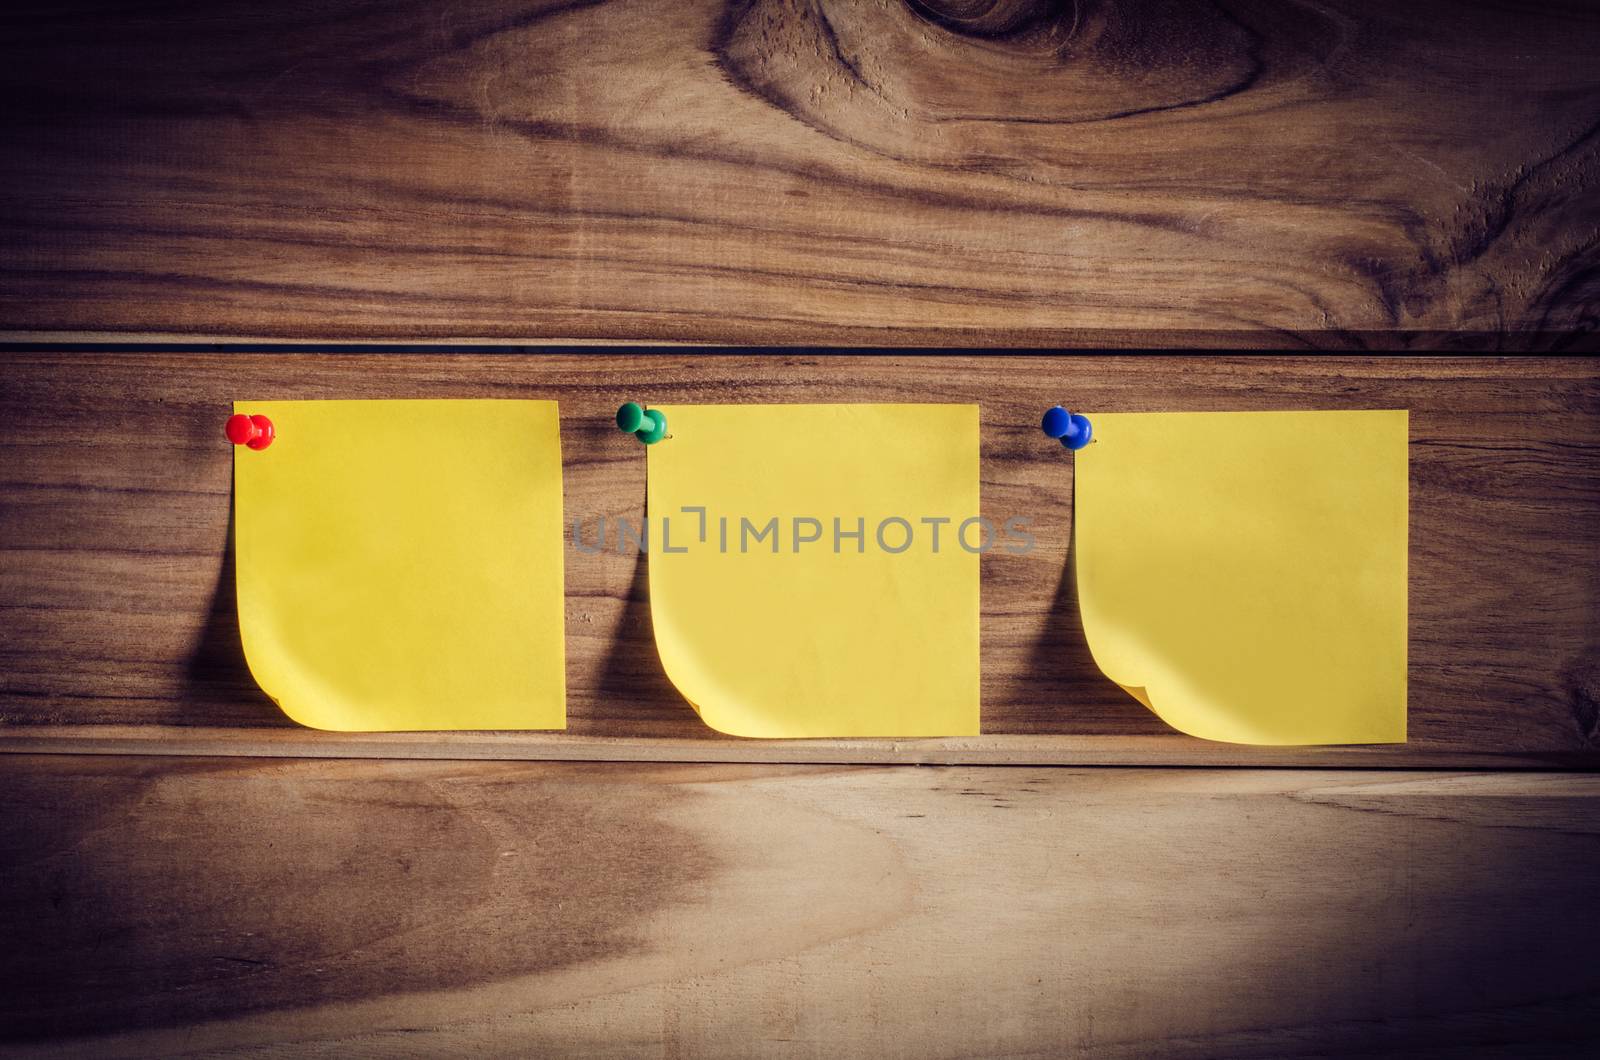 Note the yellow patch on a wooden board. by photobyphotoboy